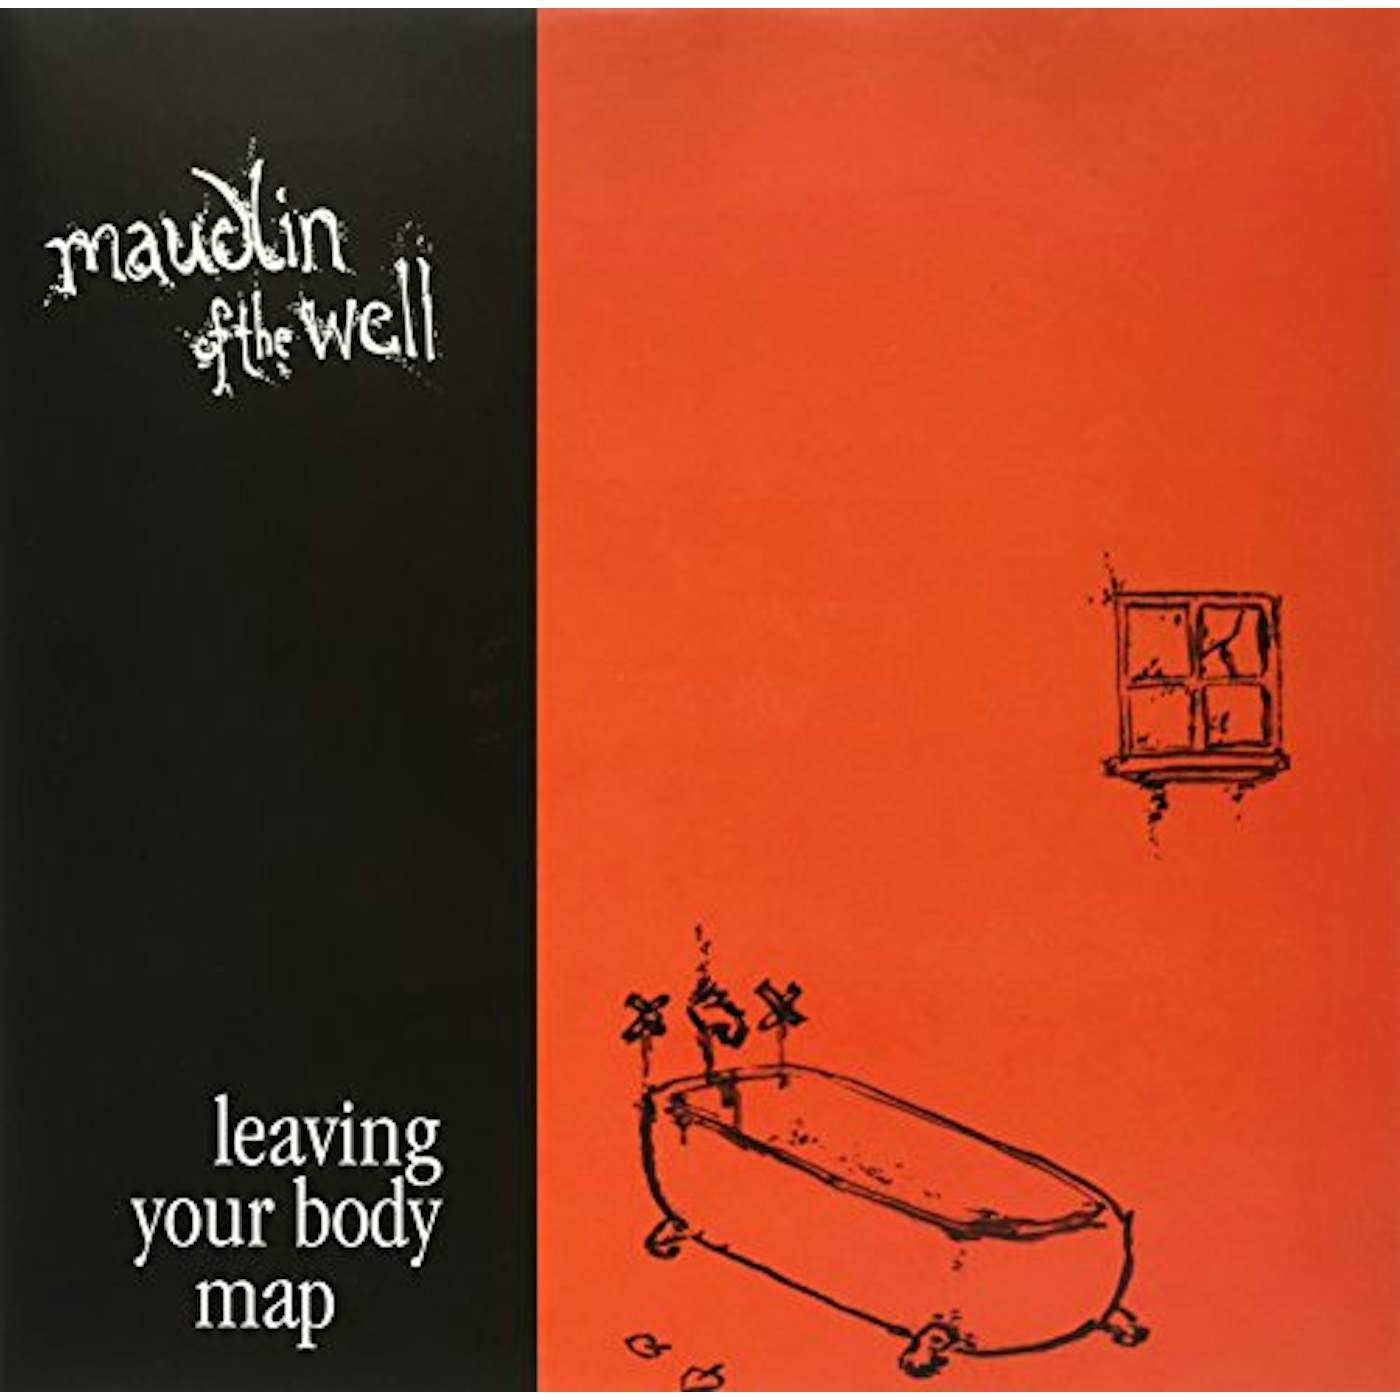 maudlin of the Well Leaving Your Body Map Vinyl Record